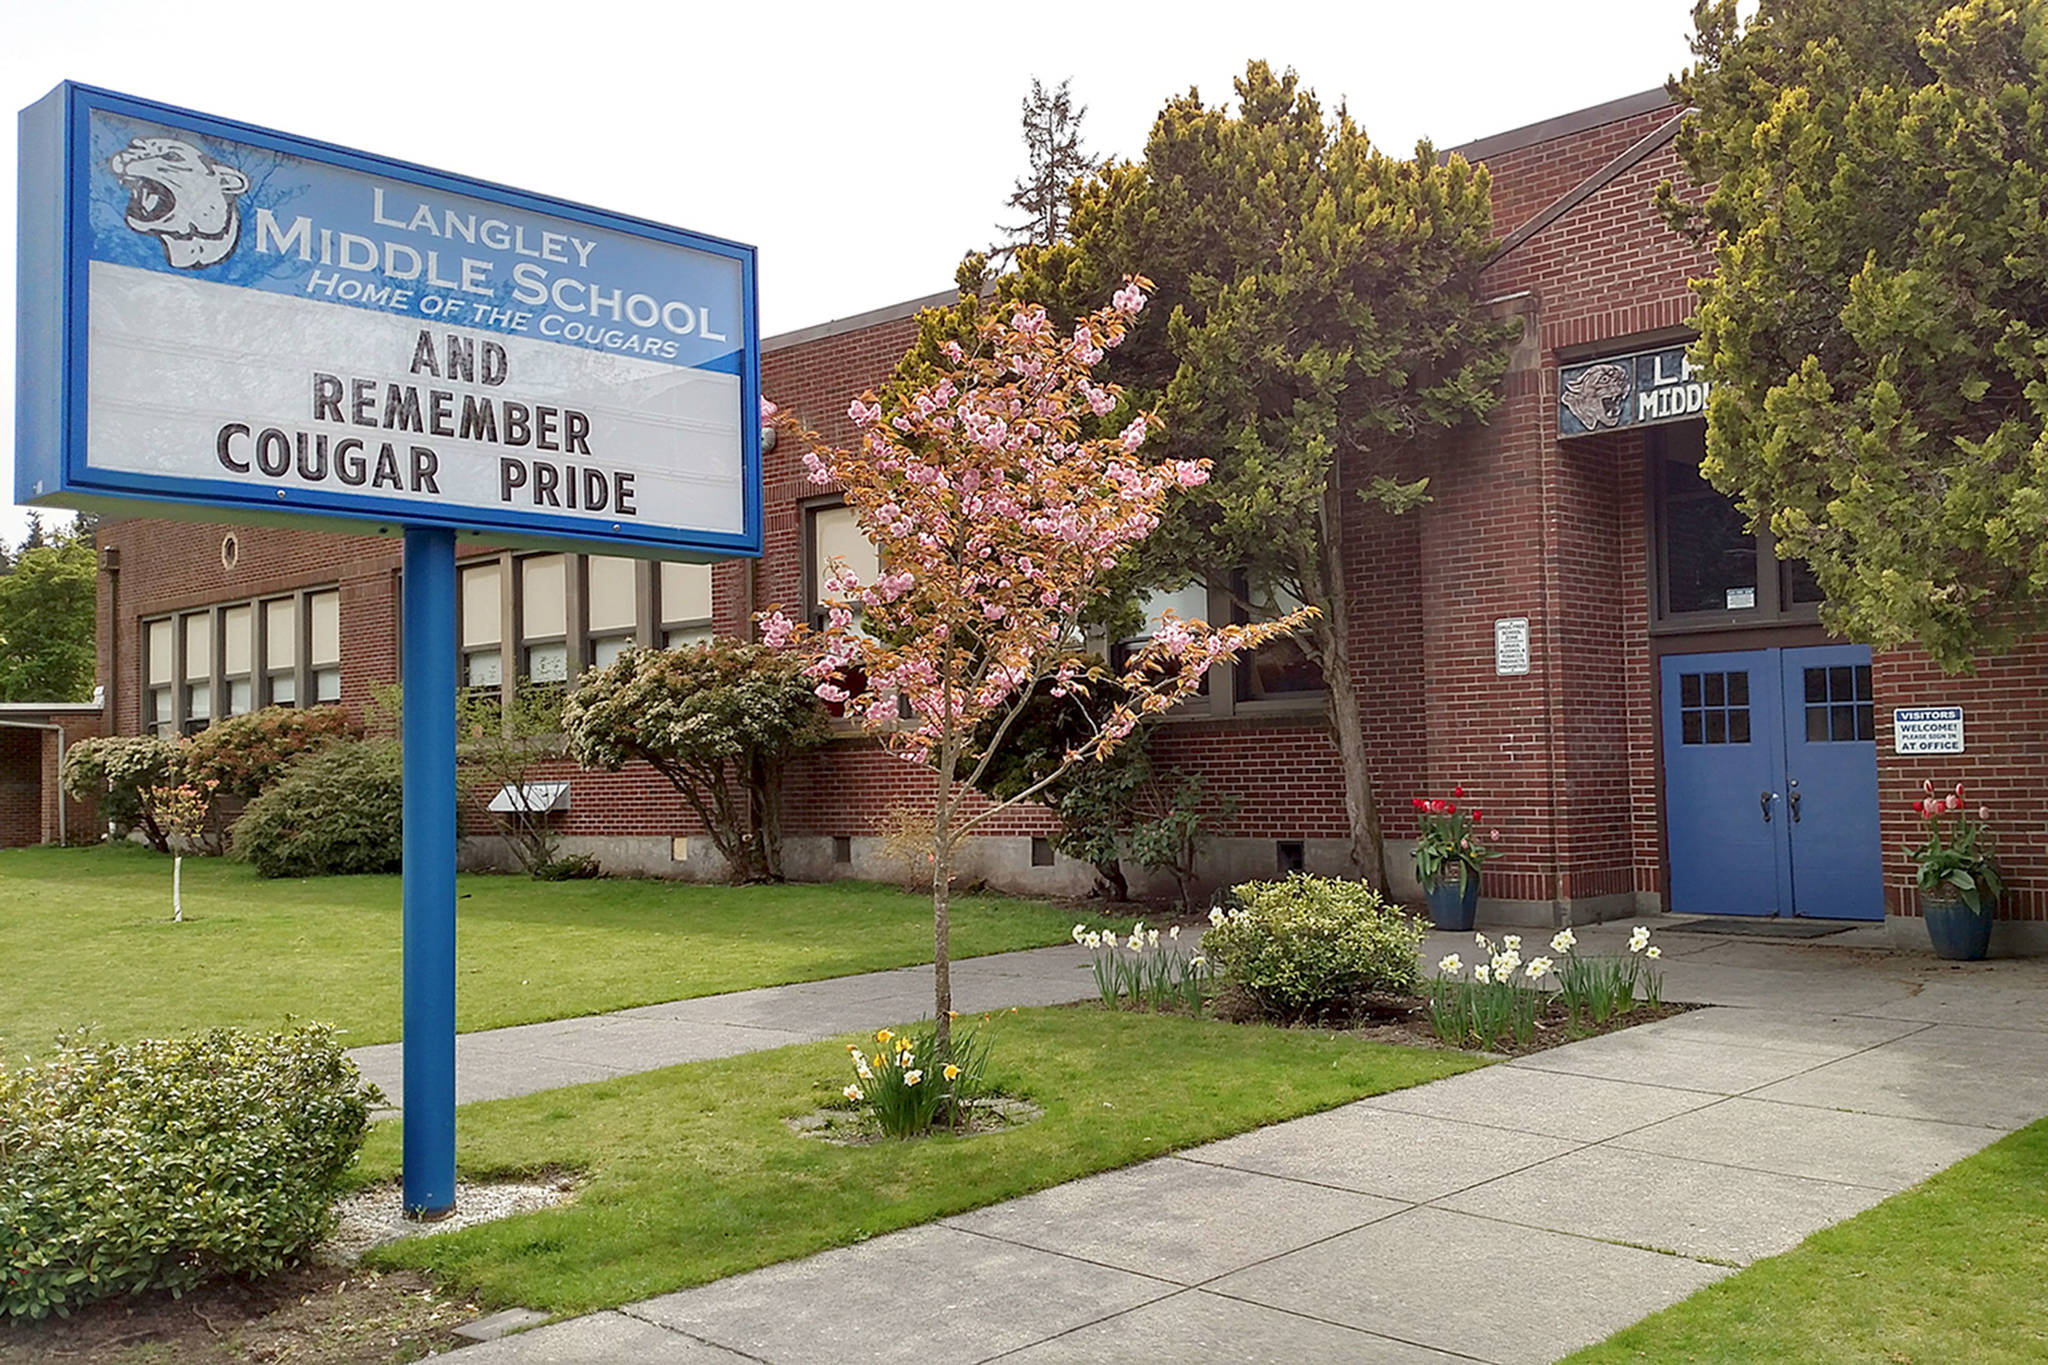 Community to bid adieu to Langley Middle School on Friday